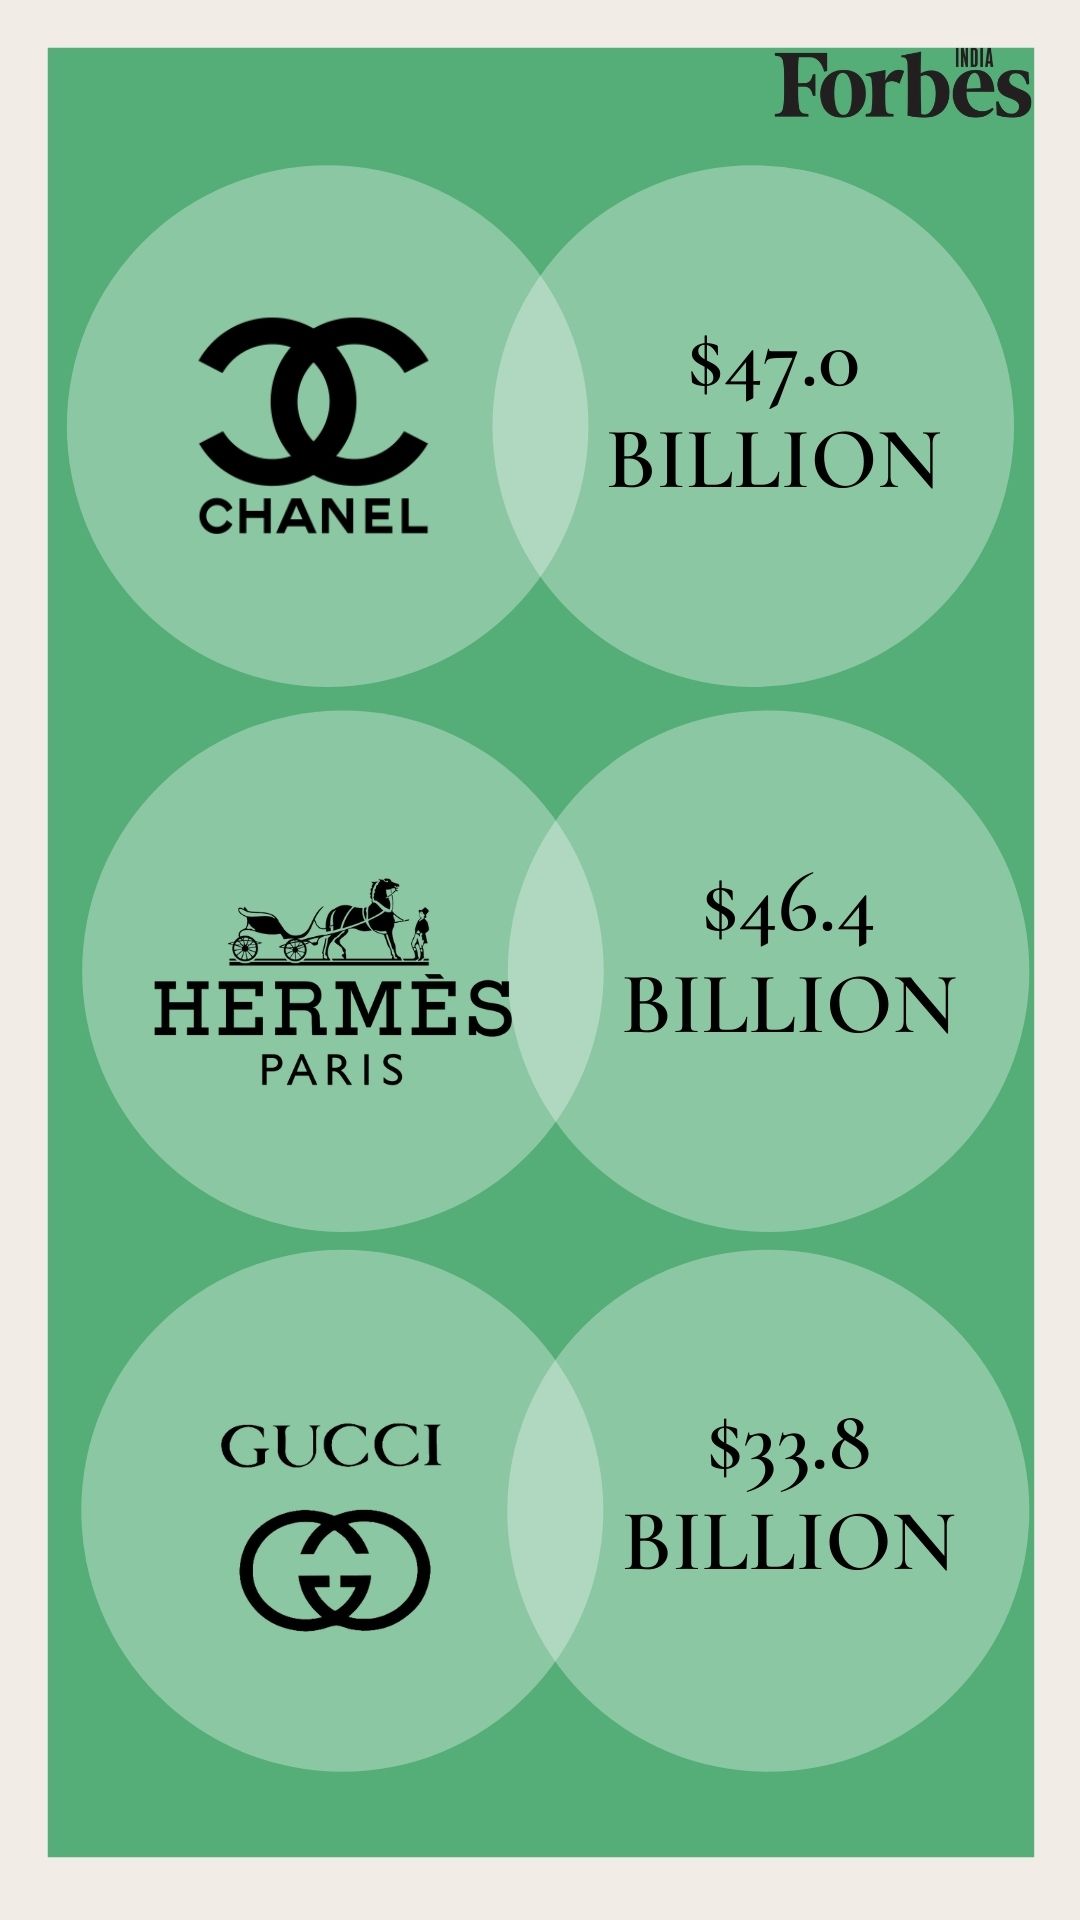 From Louis Vuitton to Cartier, these are the world's most valuable luxury brands of 2021